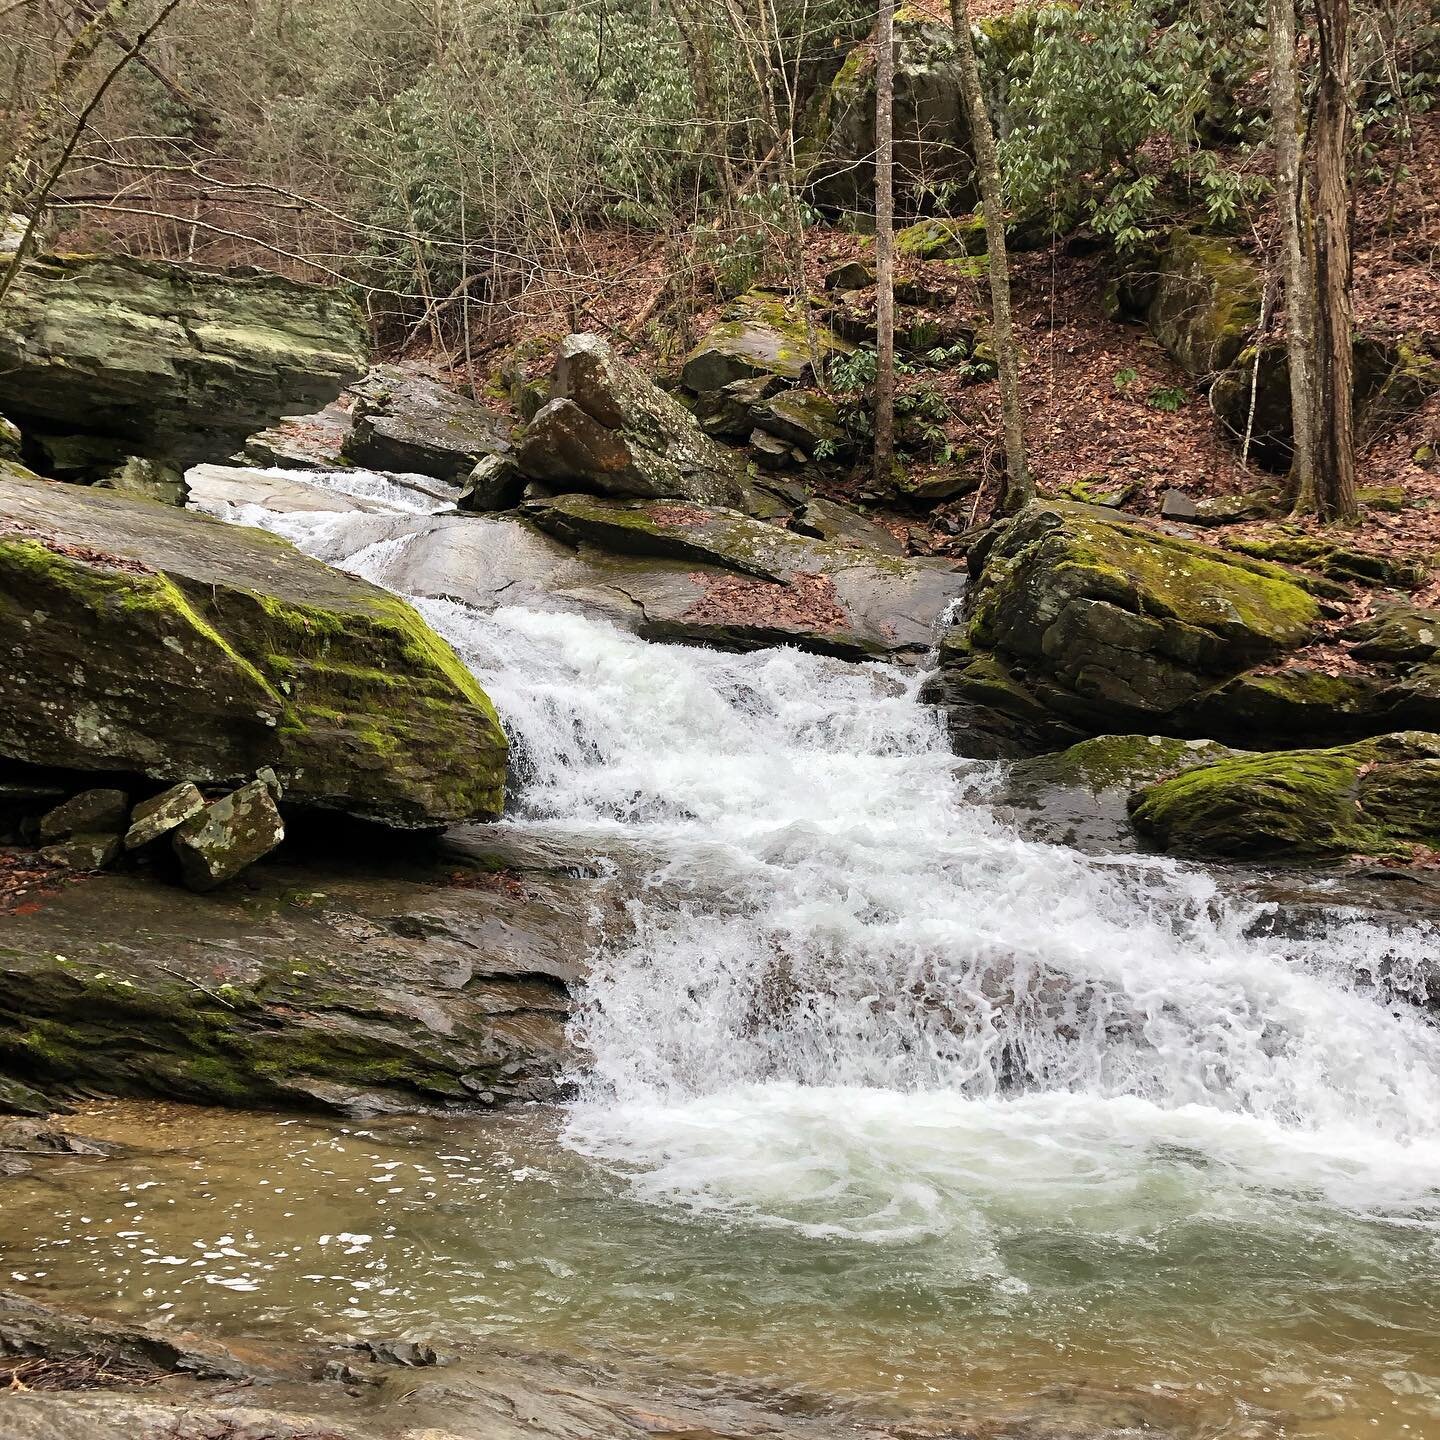 Crab Orchard Falls Trail. Discovered this great new waterfall. Nice trail, about 1.5 mi total out and back. Best thing is it&rsquo;s only about a mile from Mast General Store. Will be adding it to our best waterfalls list on the web site! Valle Cruci